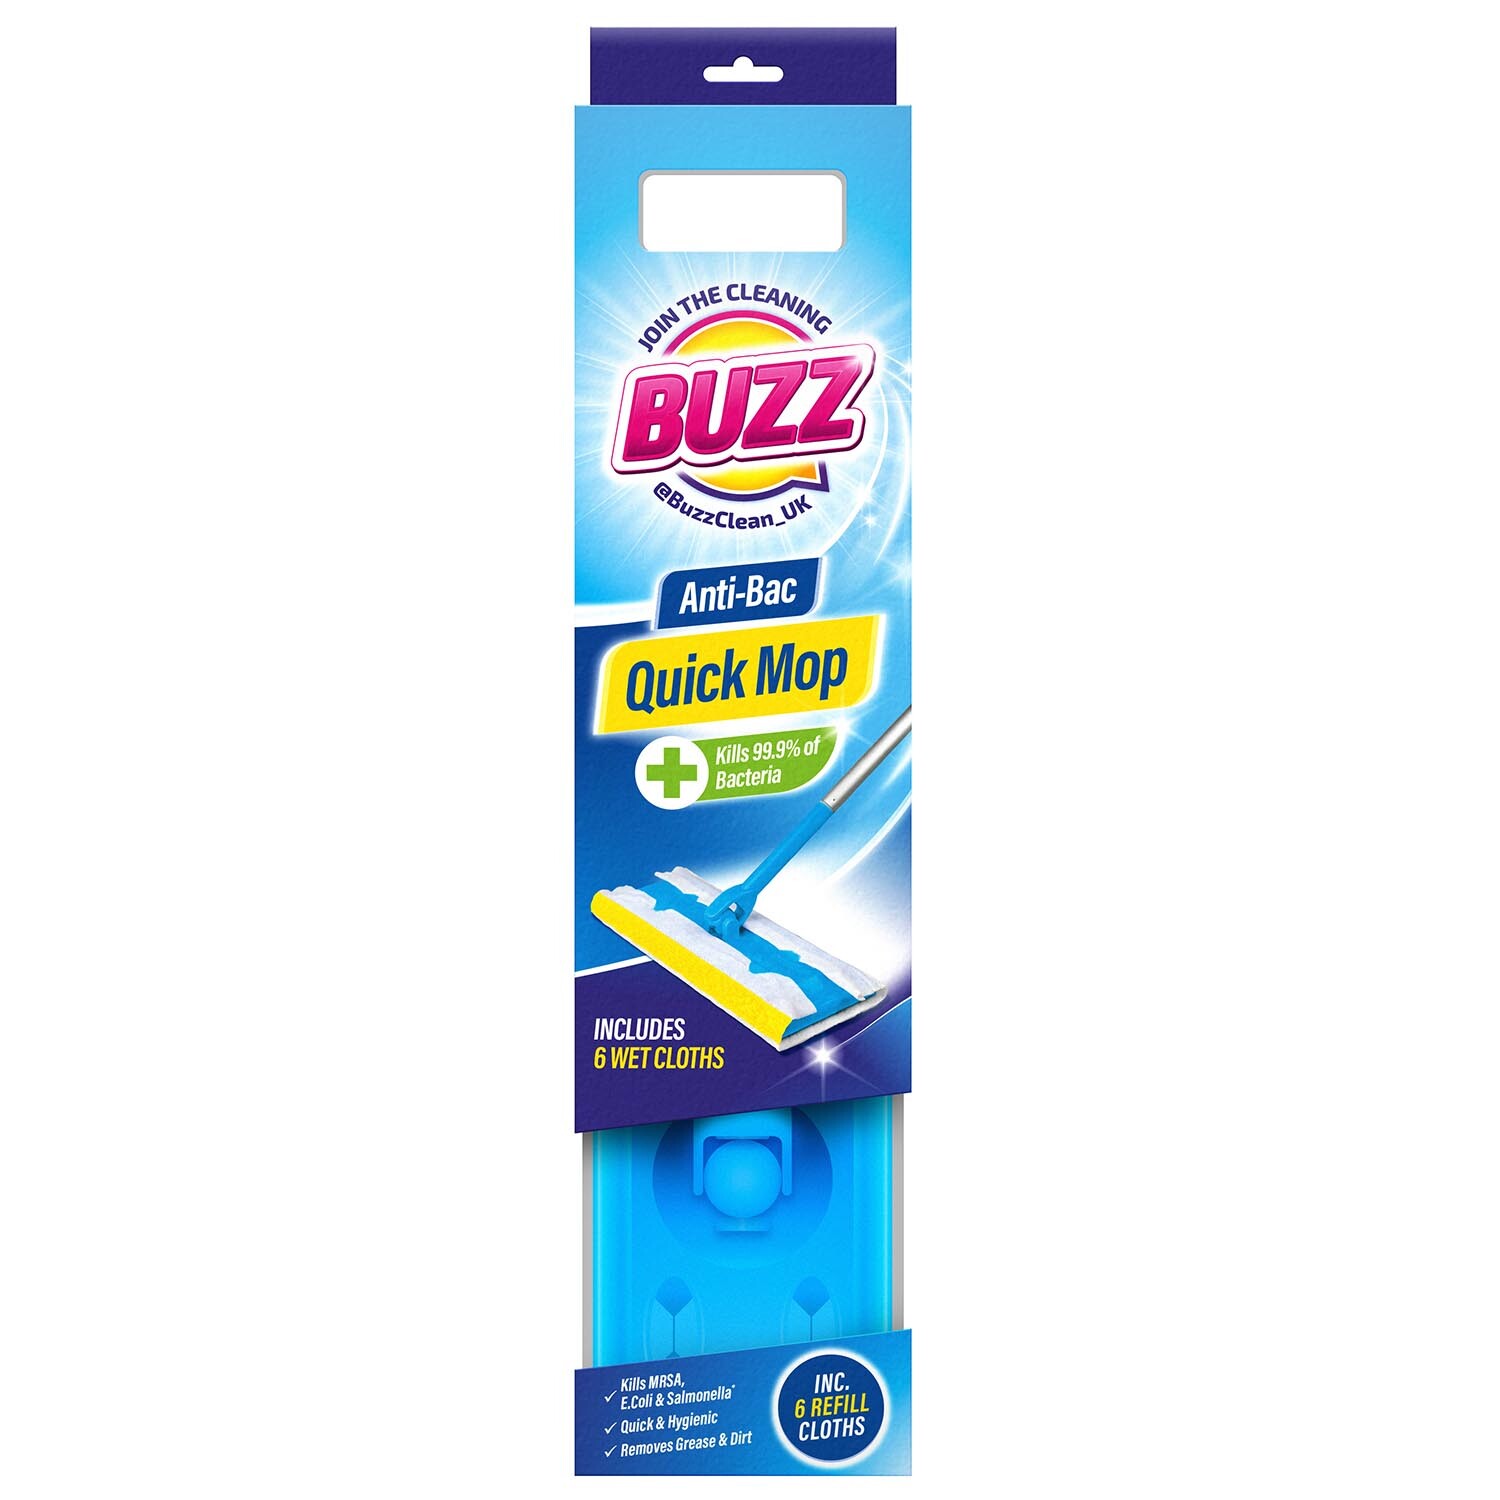 Buzz AntiBac Mop Head and Wet Cloth Refill Image